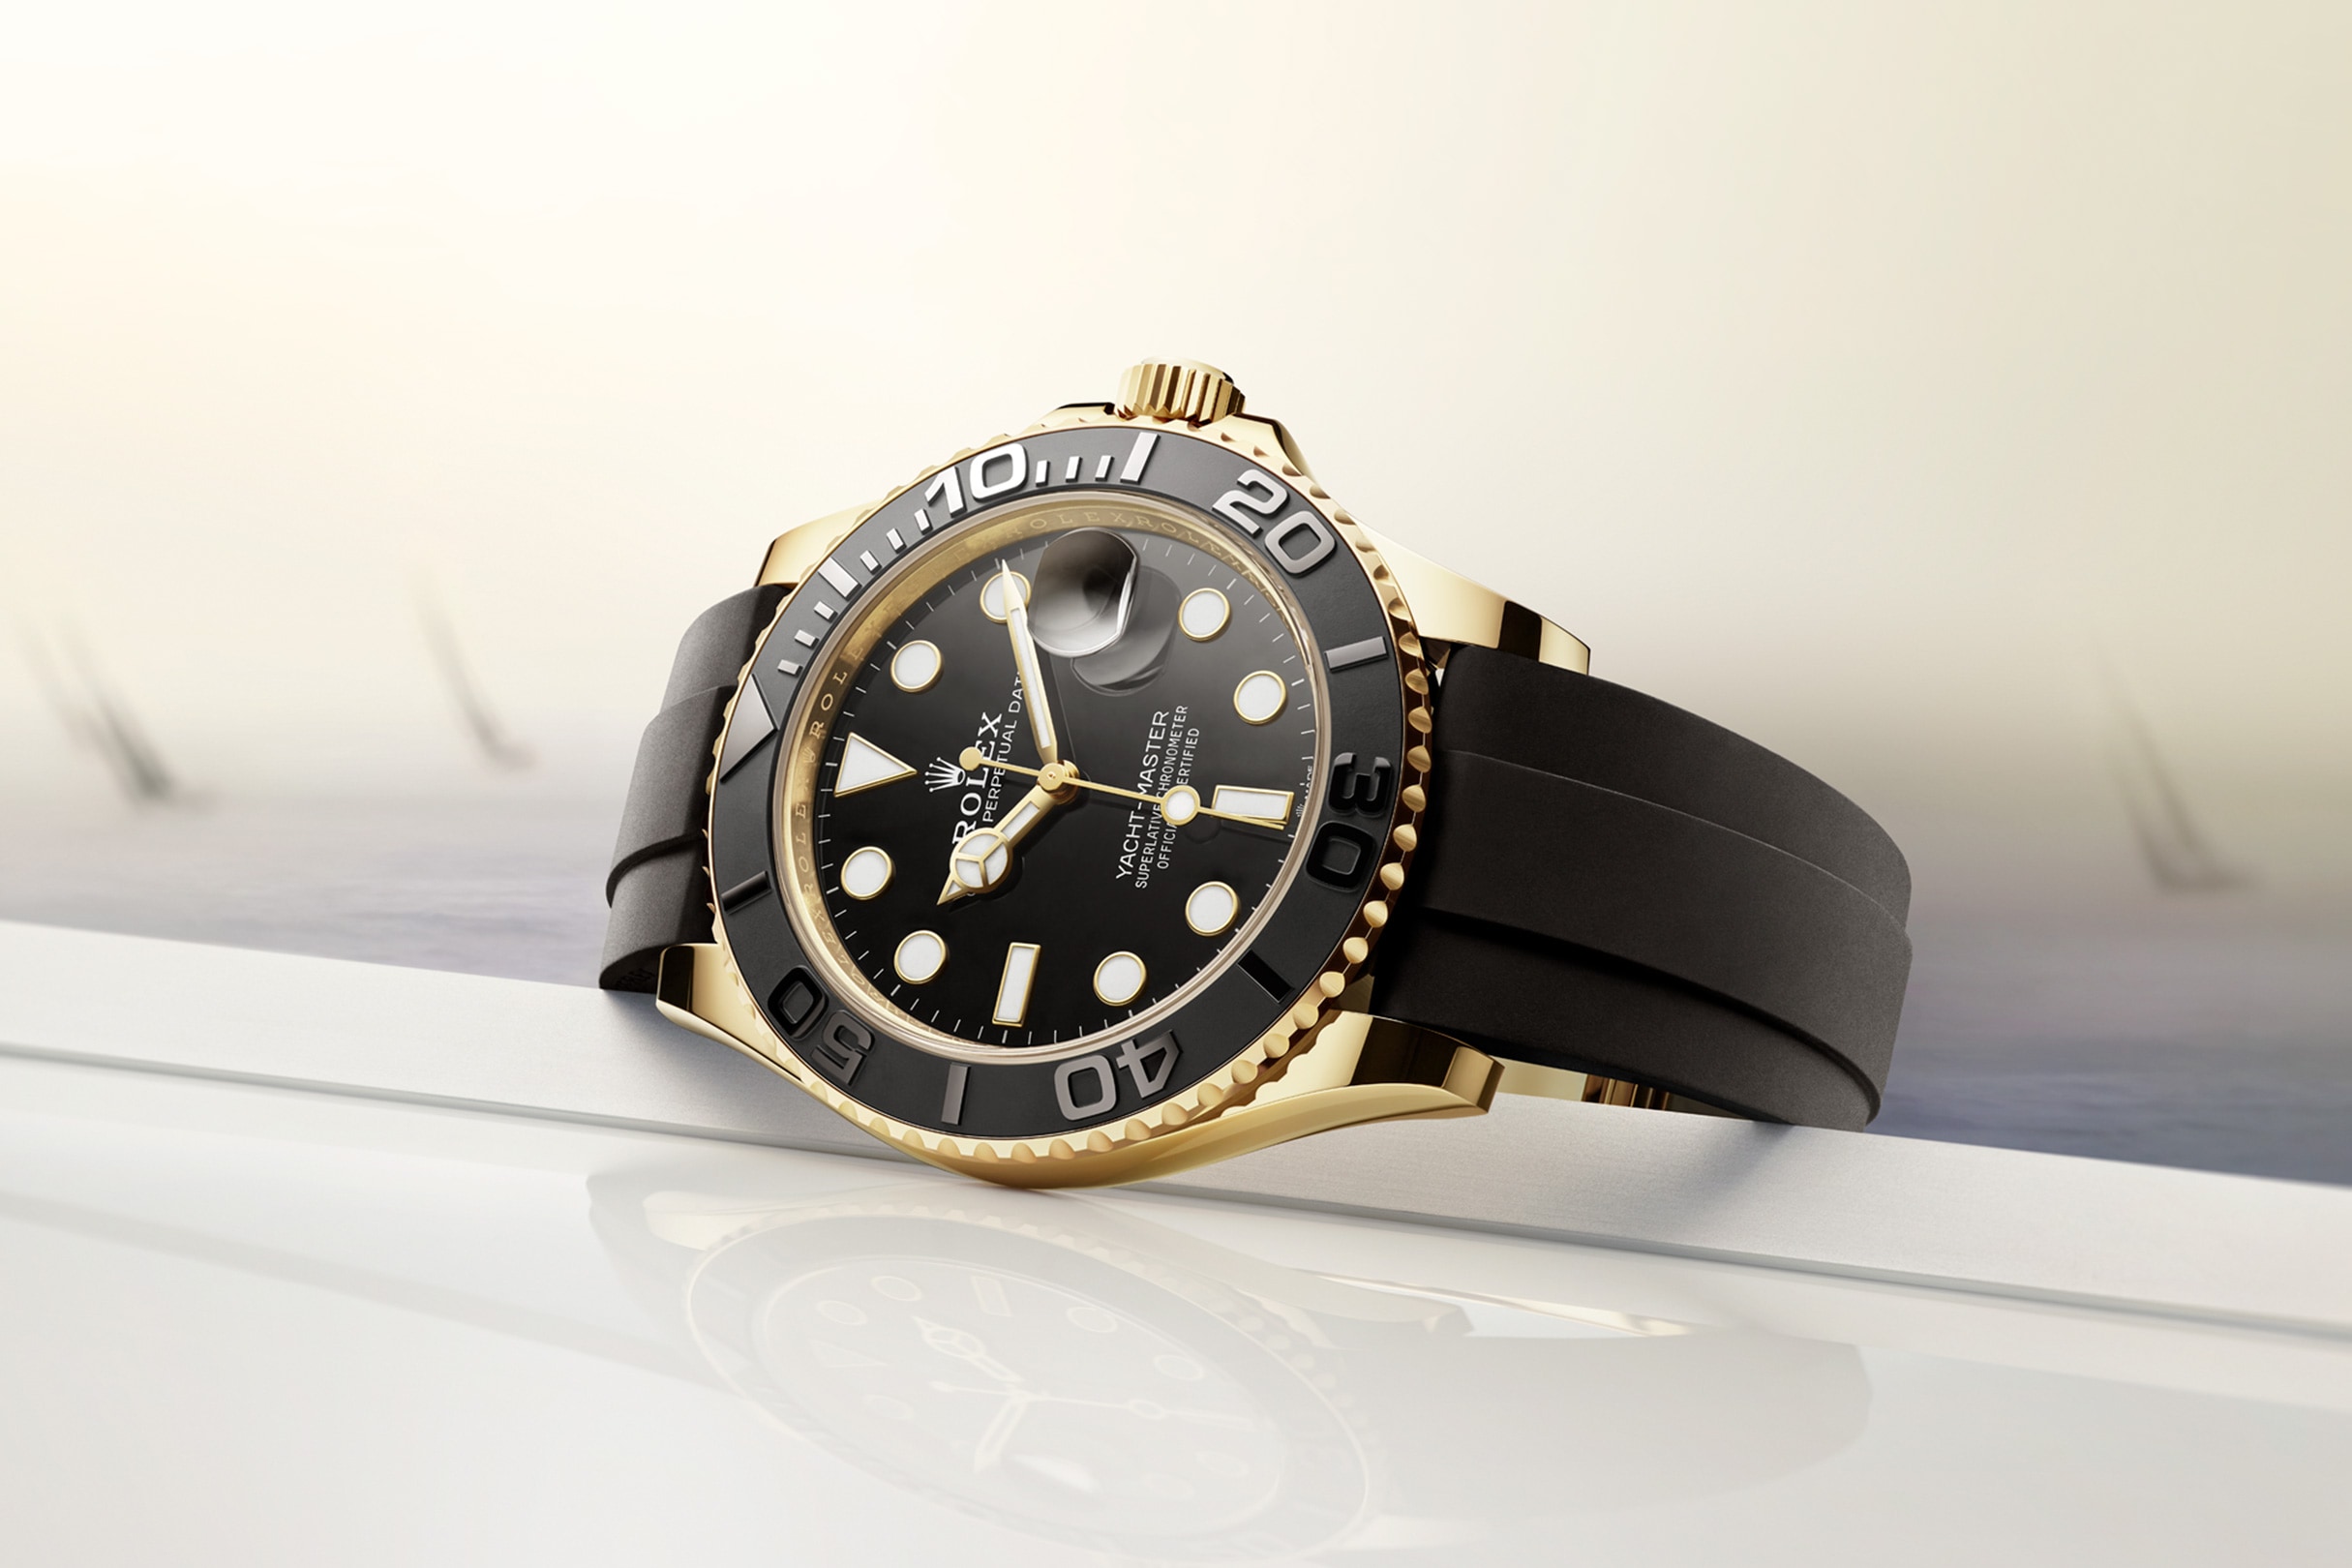 Rolex Releases The Yacht-Master Watch With Yellow Gold Eye Dial Variants | aBlogtoWatch